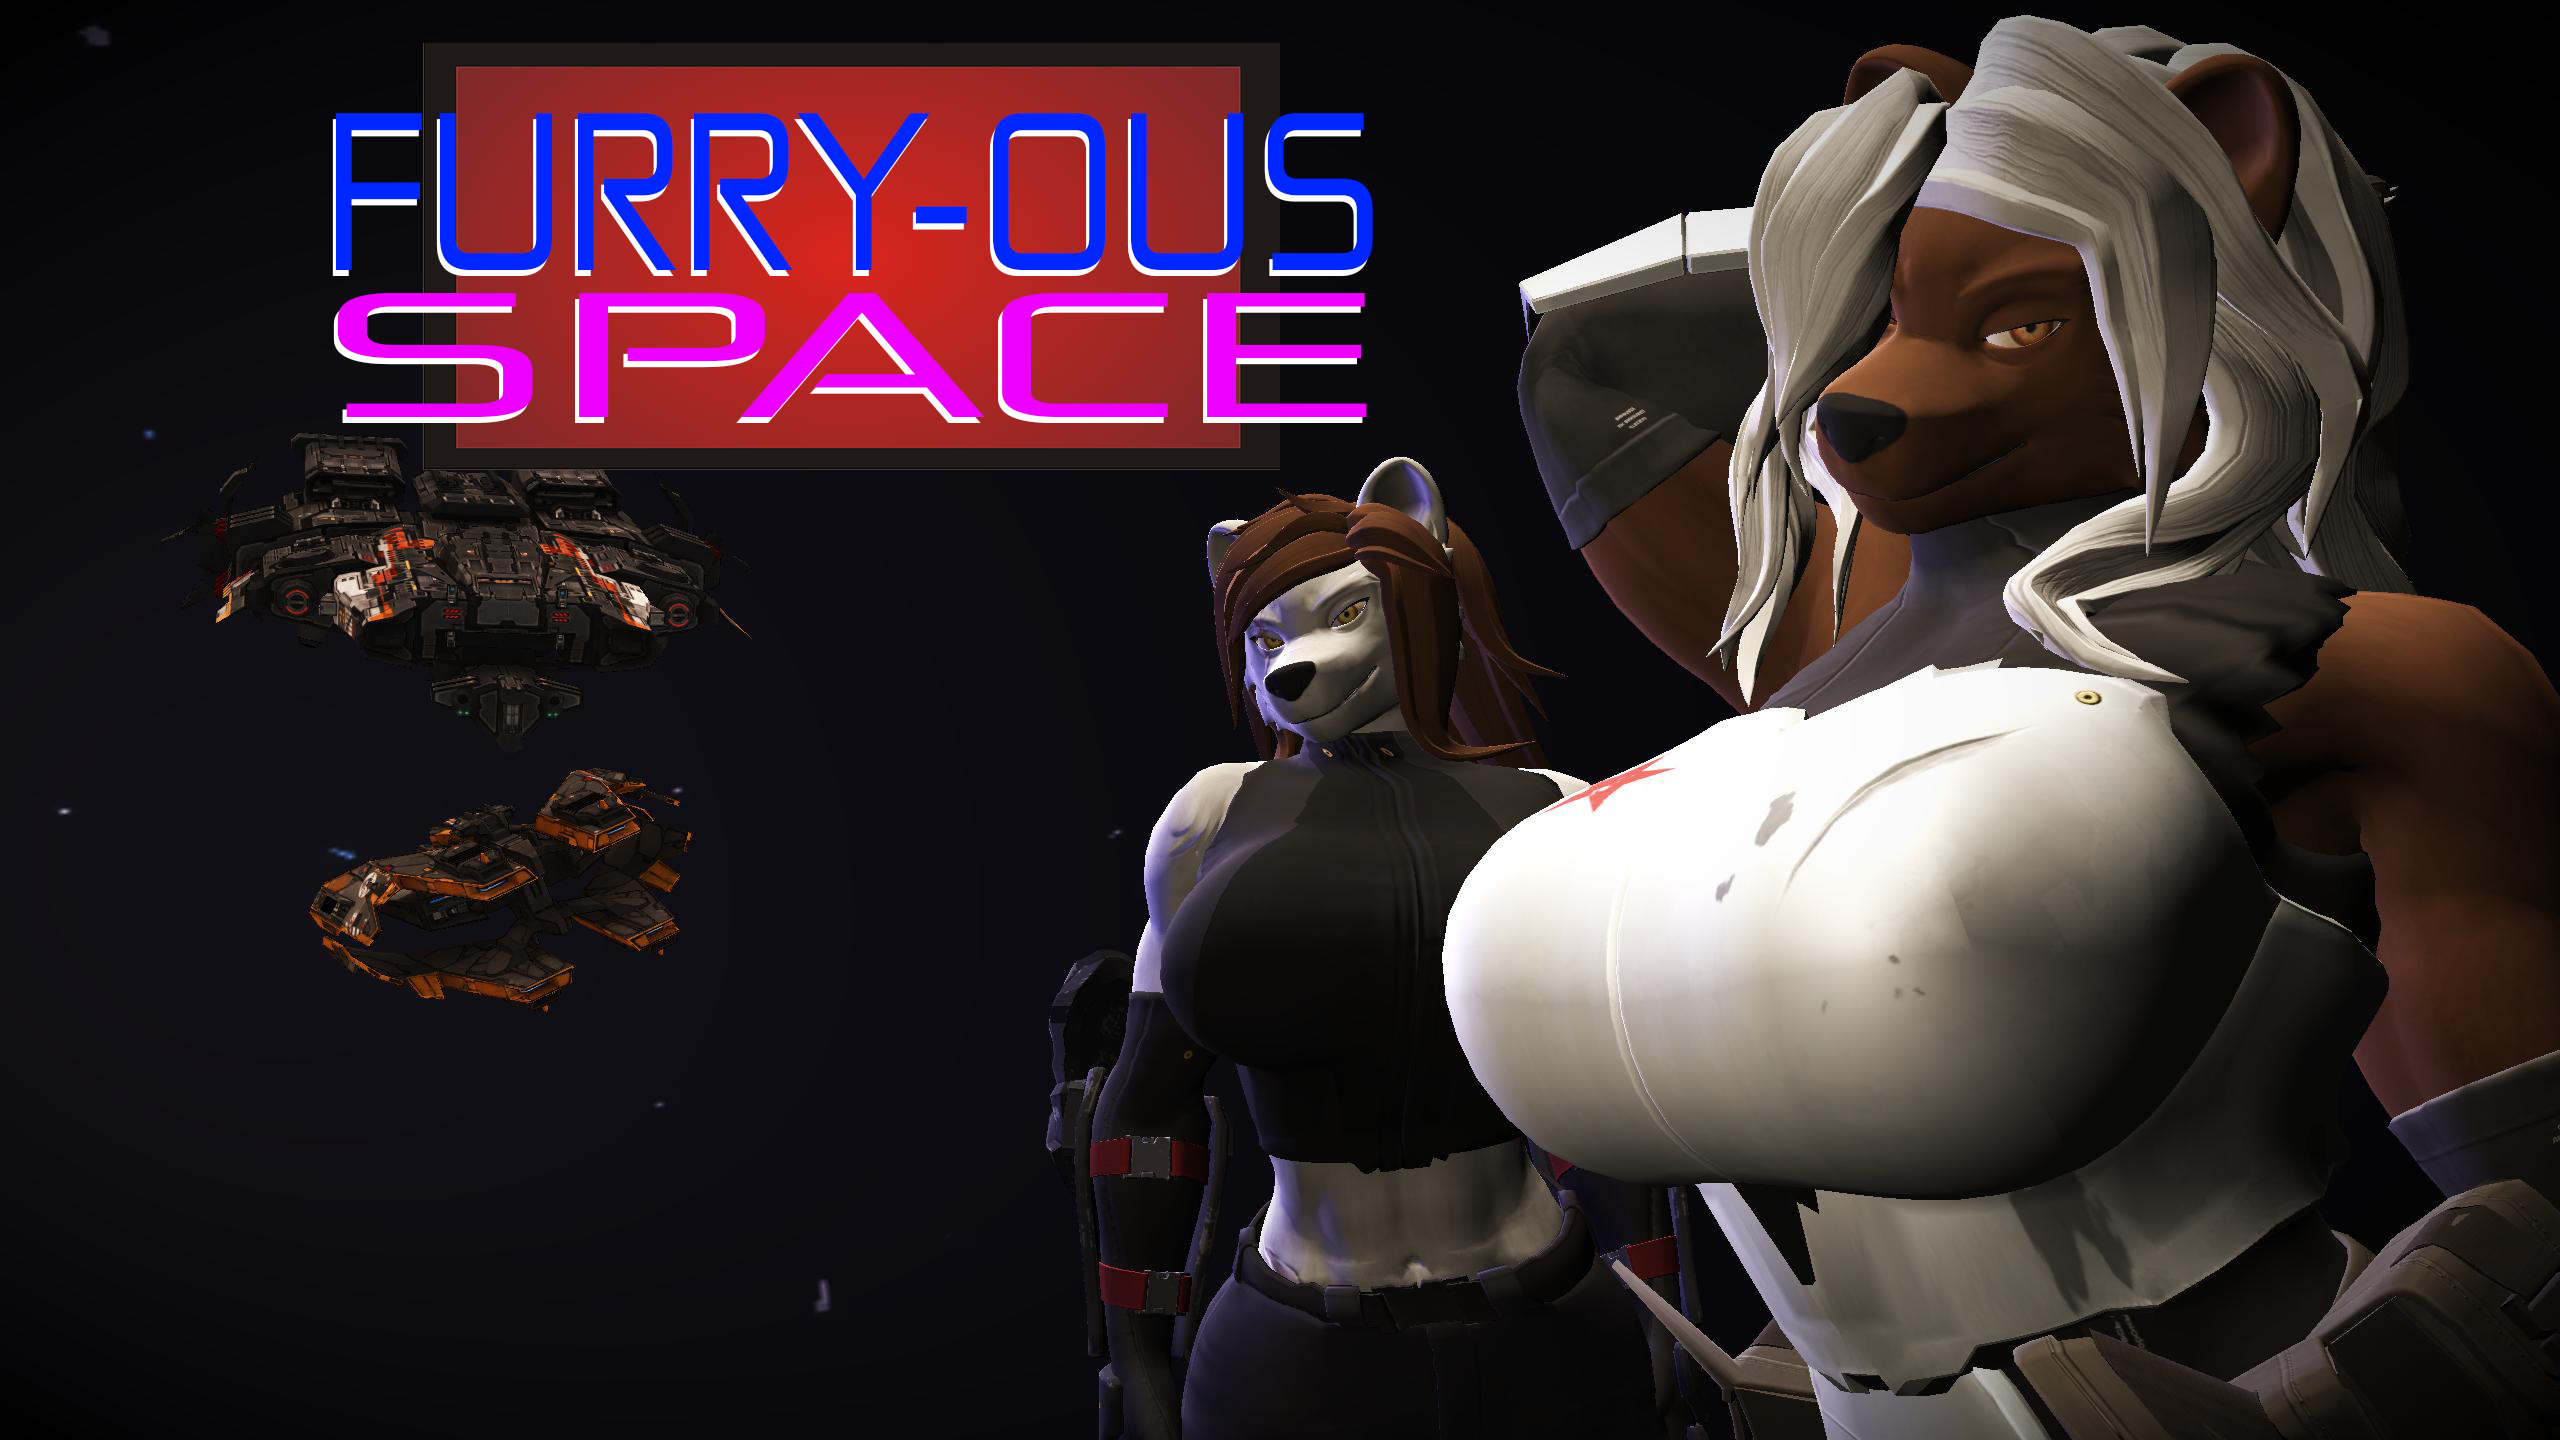 2560px x 1440px - Furry-ous Space Demo for Oculus/Meta Quest and Rift by Bald Hamster Games